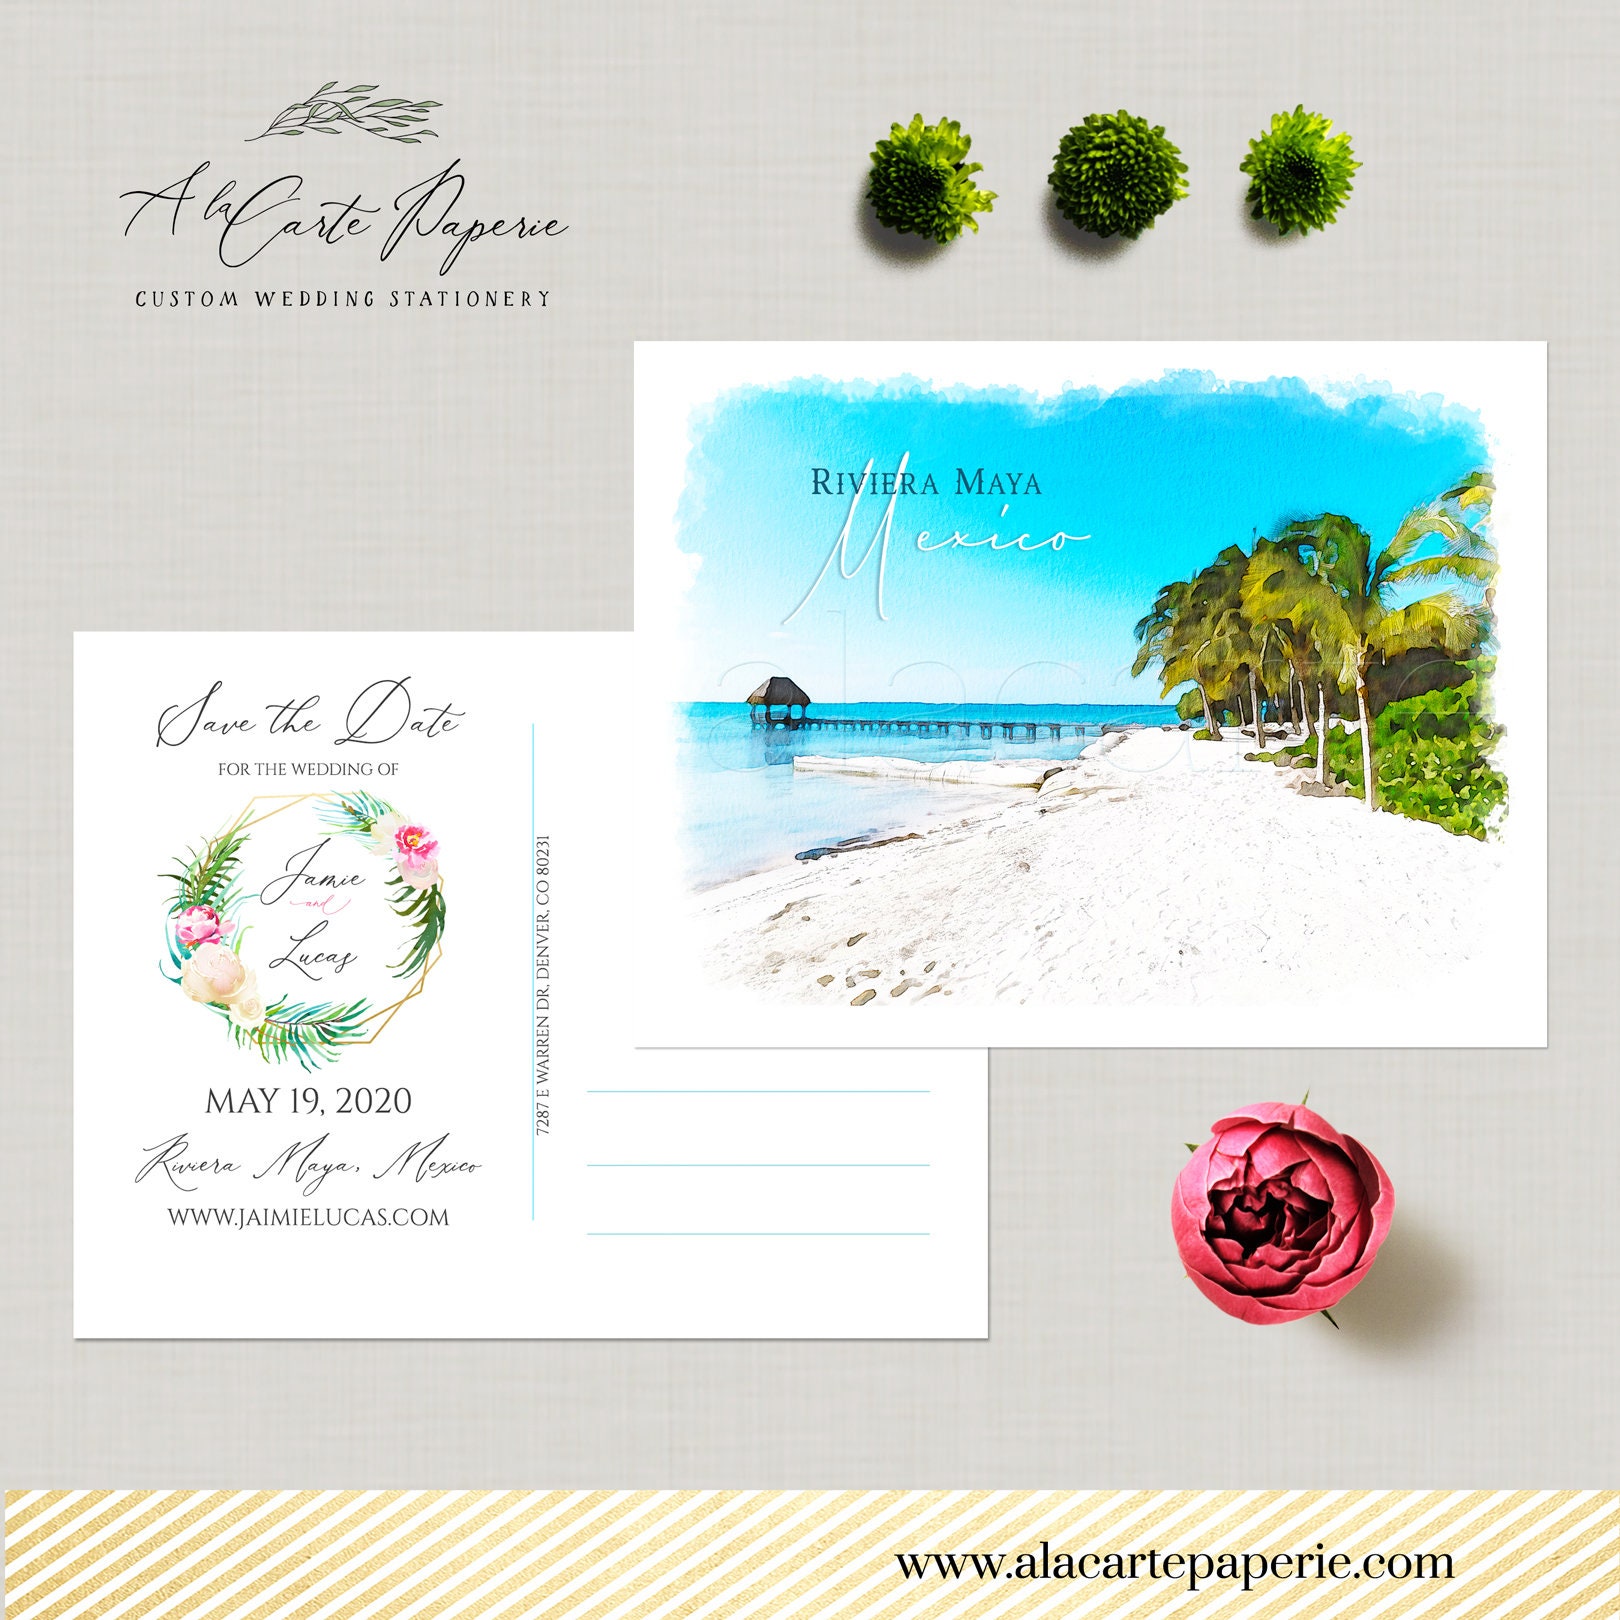 Destination wedding invitation Hawaii Wedding Watercolor Save the Date Card postcard illustrated wedding save the date DEPOSIT PAYMENT